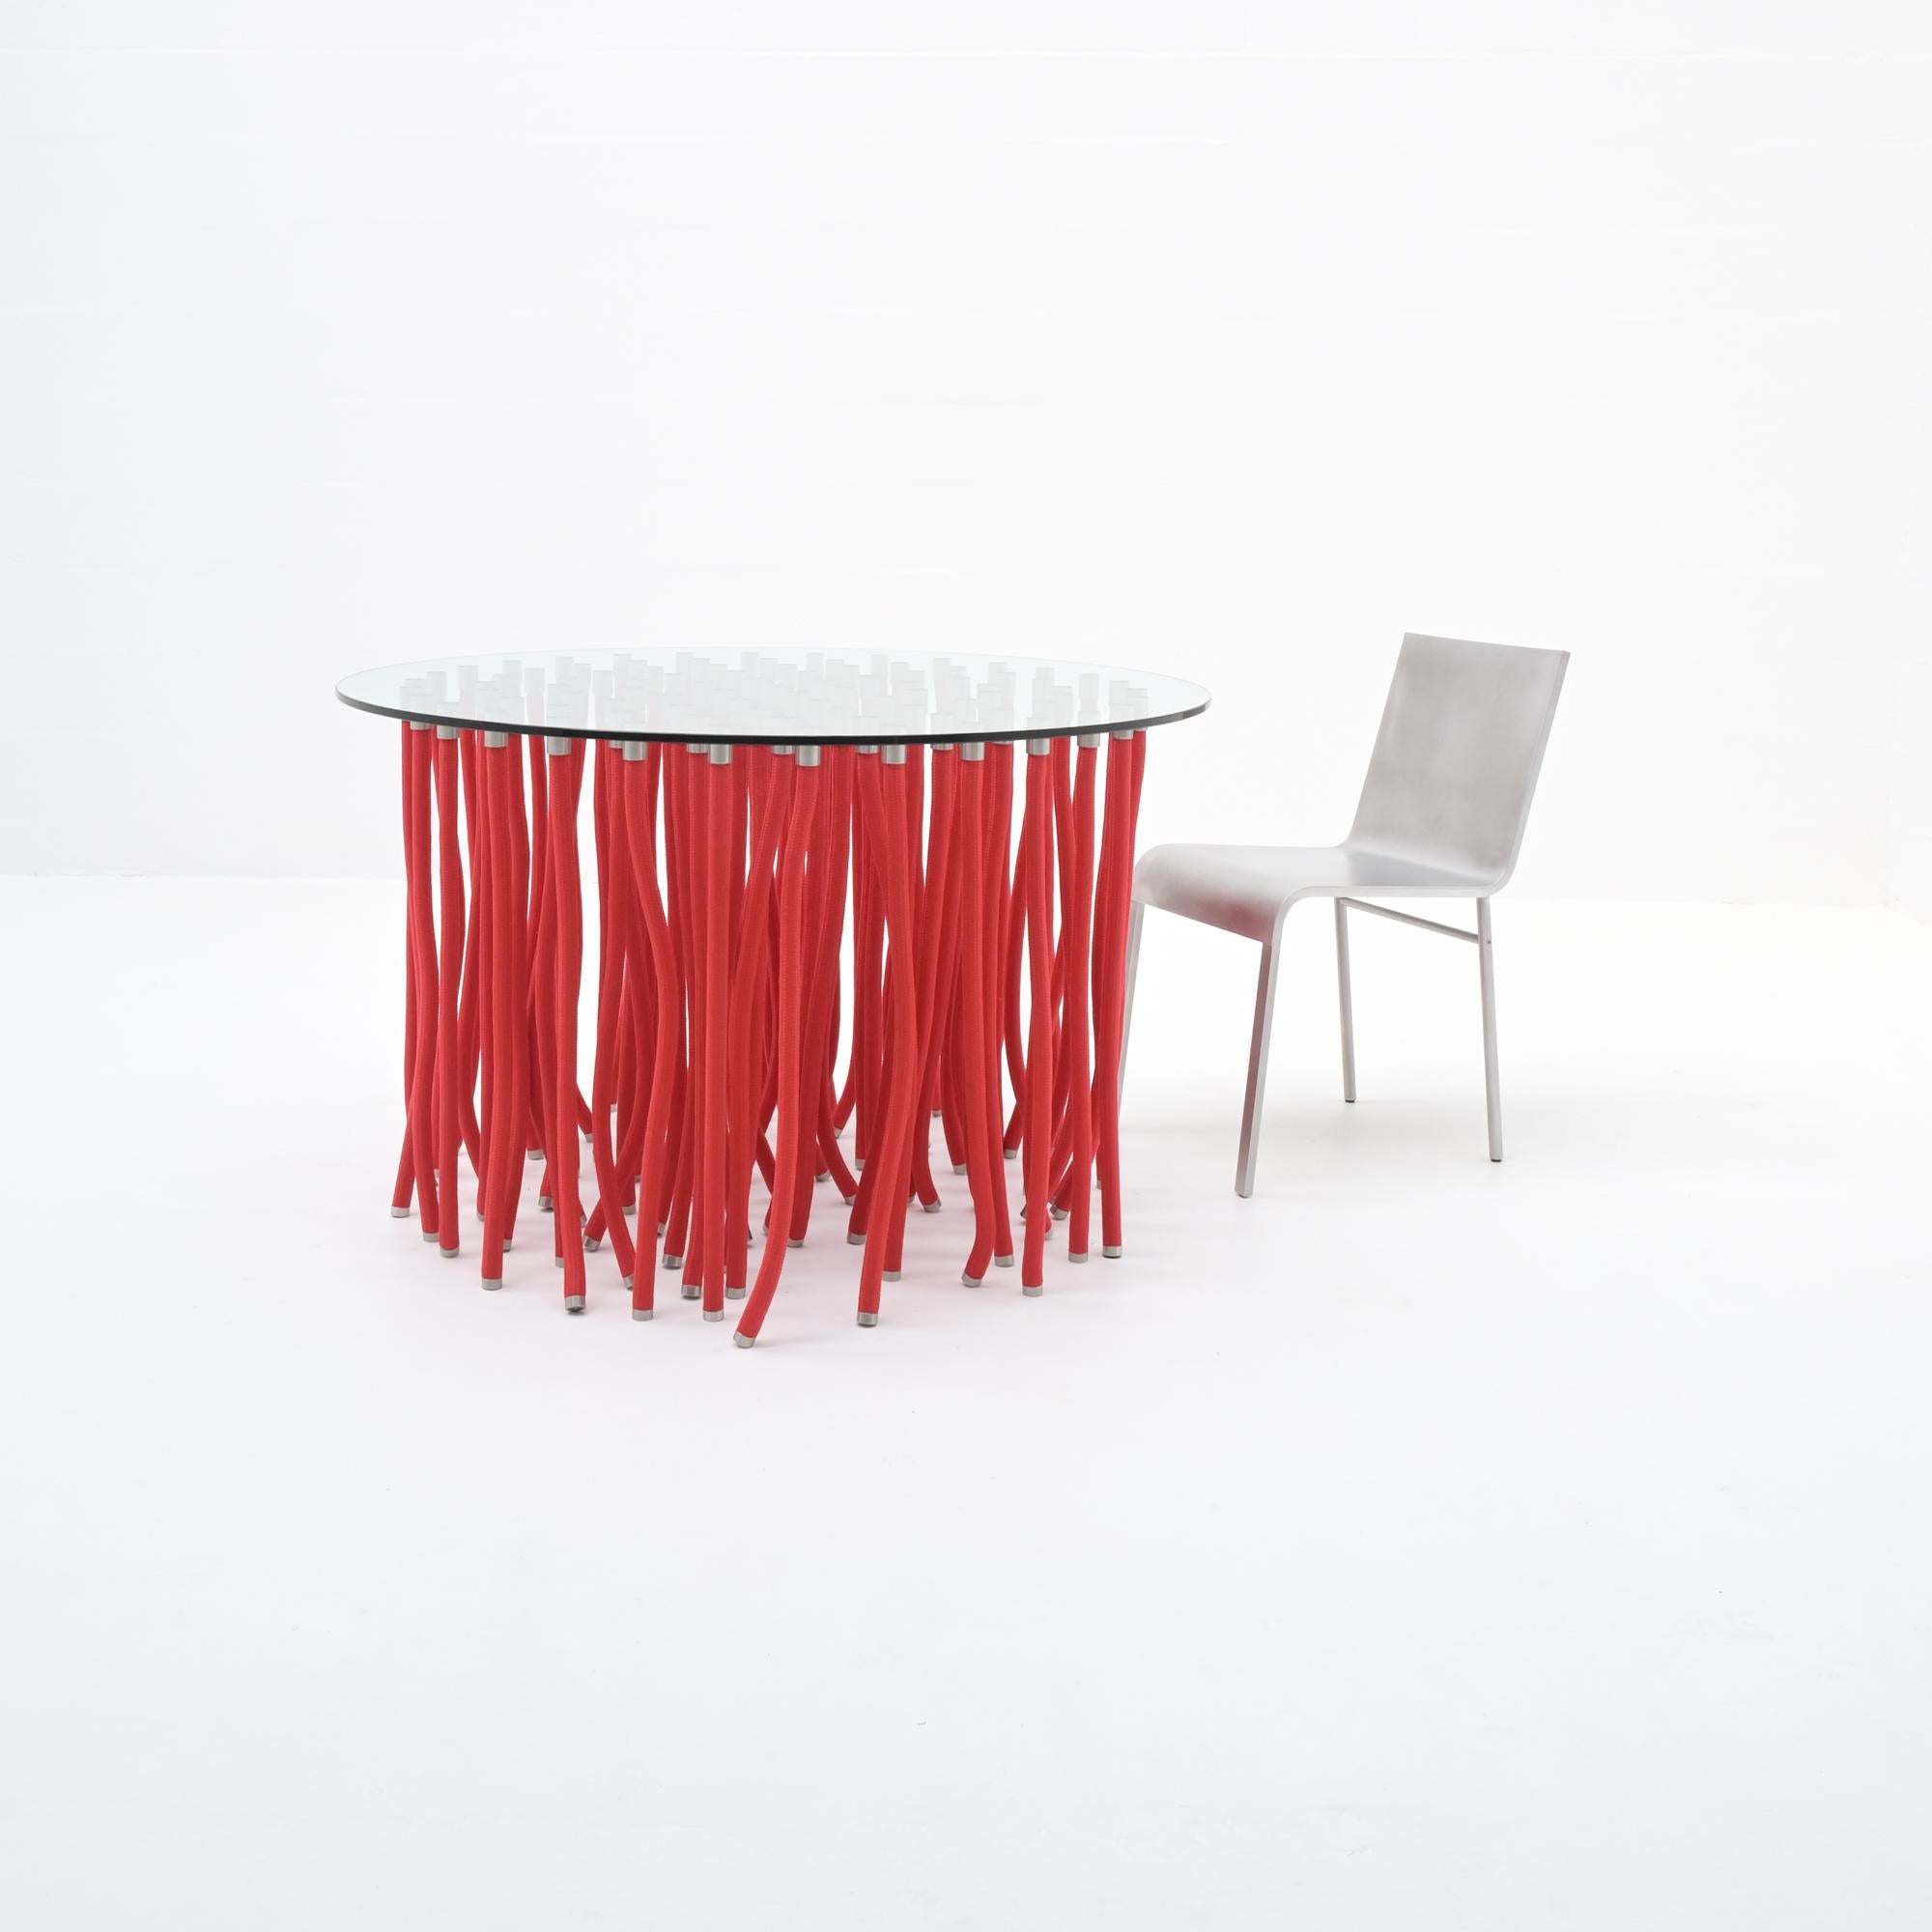 This red ORG dining table was designed by Fabio Novembre in 2001 for Cappellini. This amazing table is made of a crystal glass top supported by polypropylene rope-covered steel with exposed stainless-steel fitting. Only 5 legs support the table top.